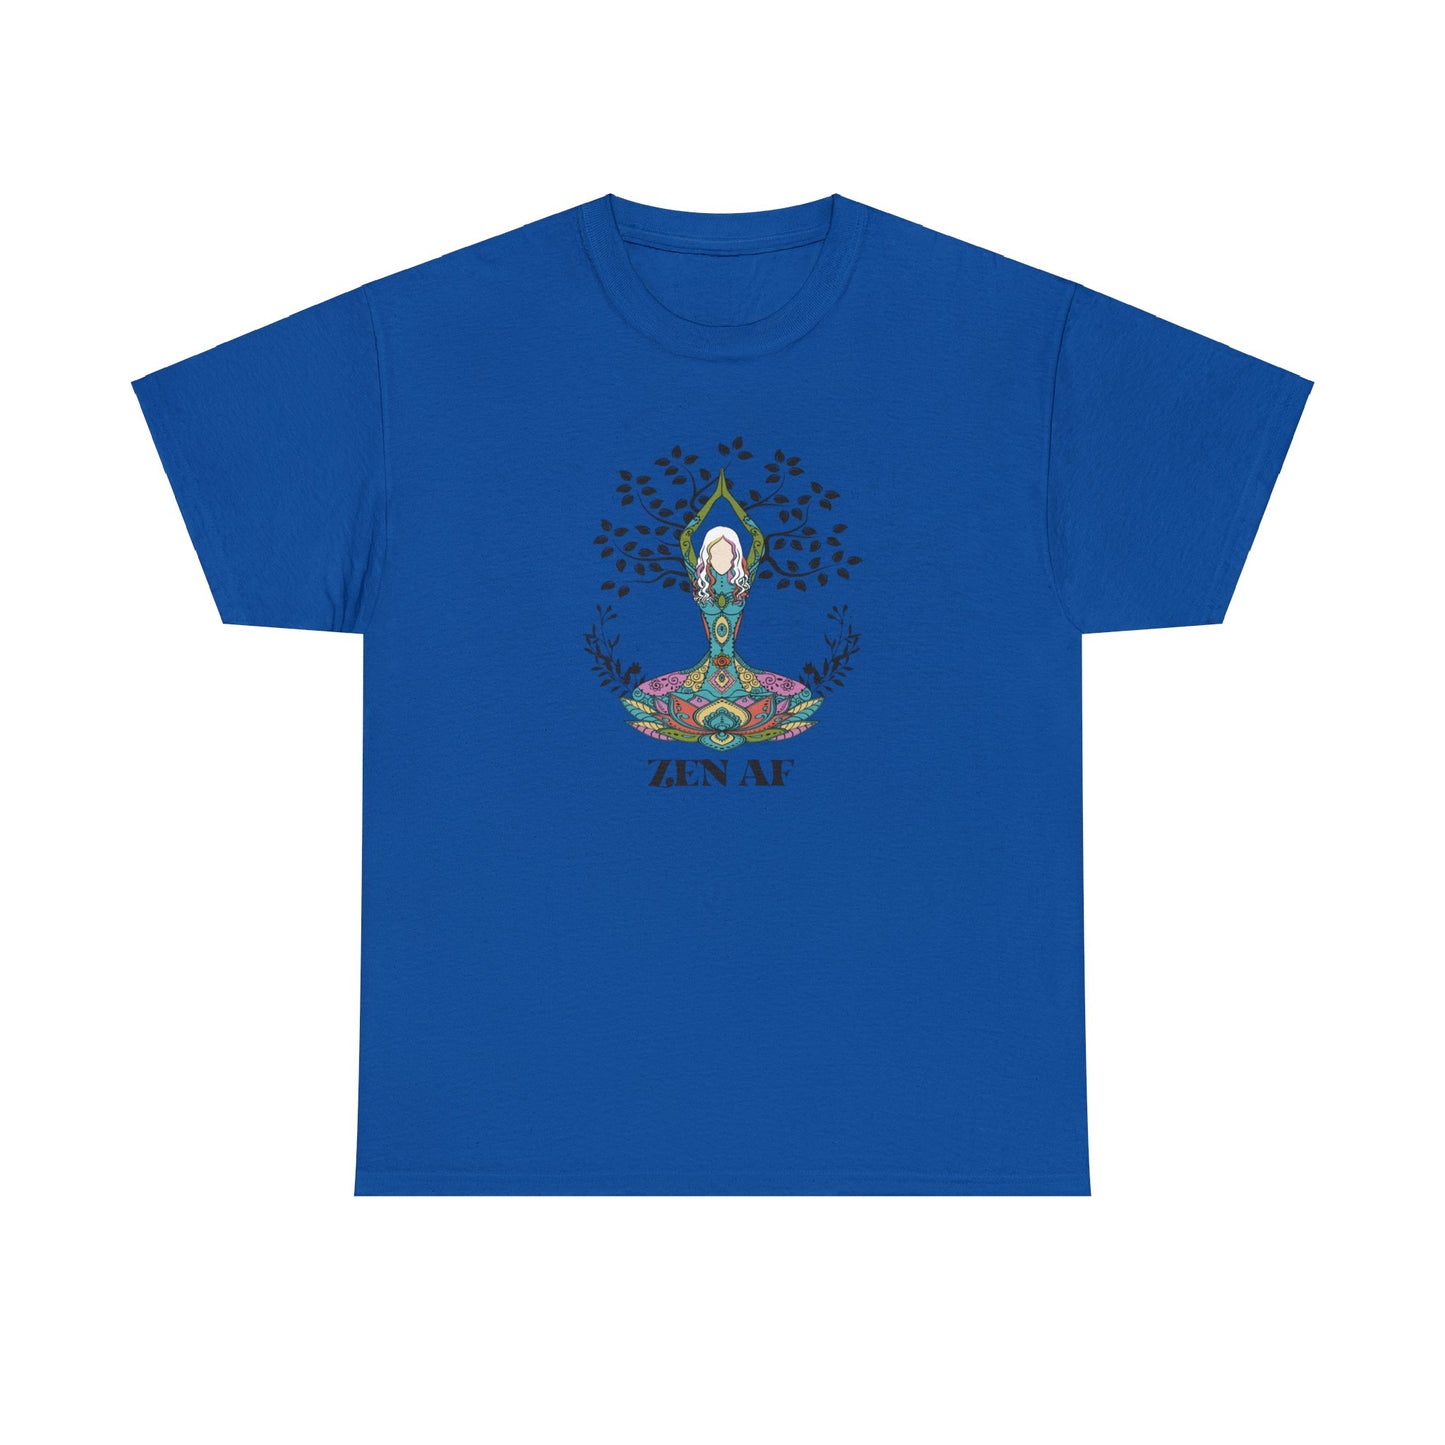 Elevate Your Yoga Game with the Stylish 'Zen AF' T-Shirt - Unisex Heavy Cotton Tee